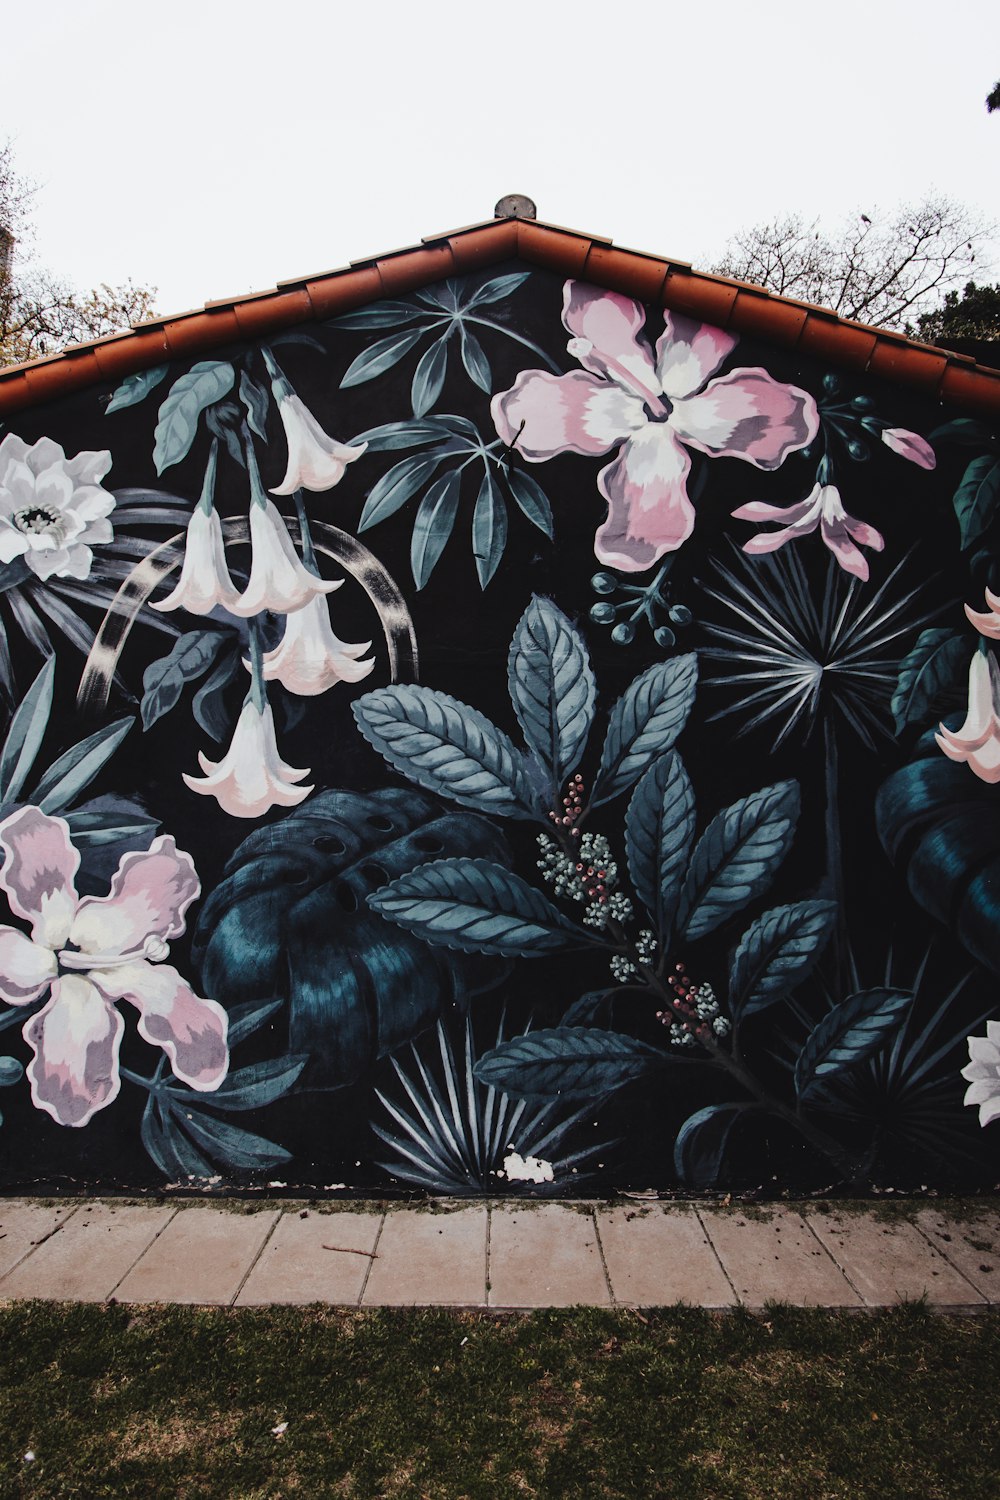 a mural of flowers painted on the side of a building